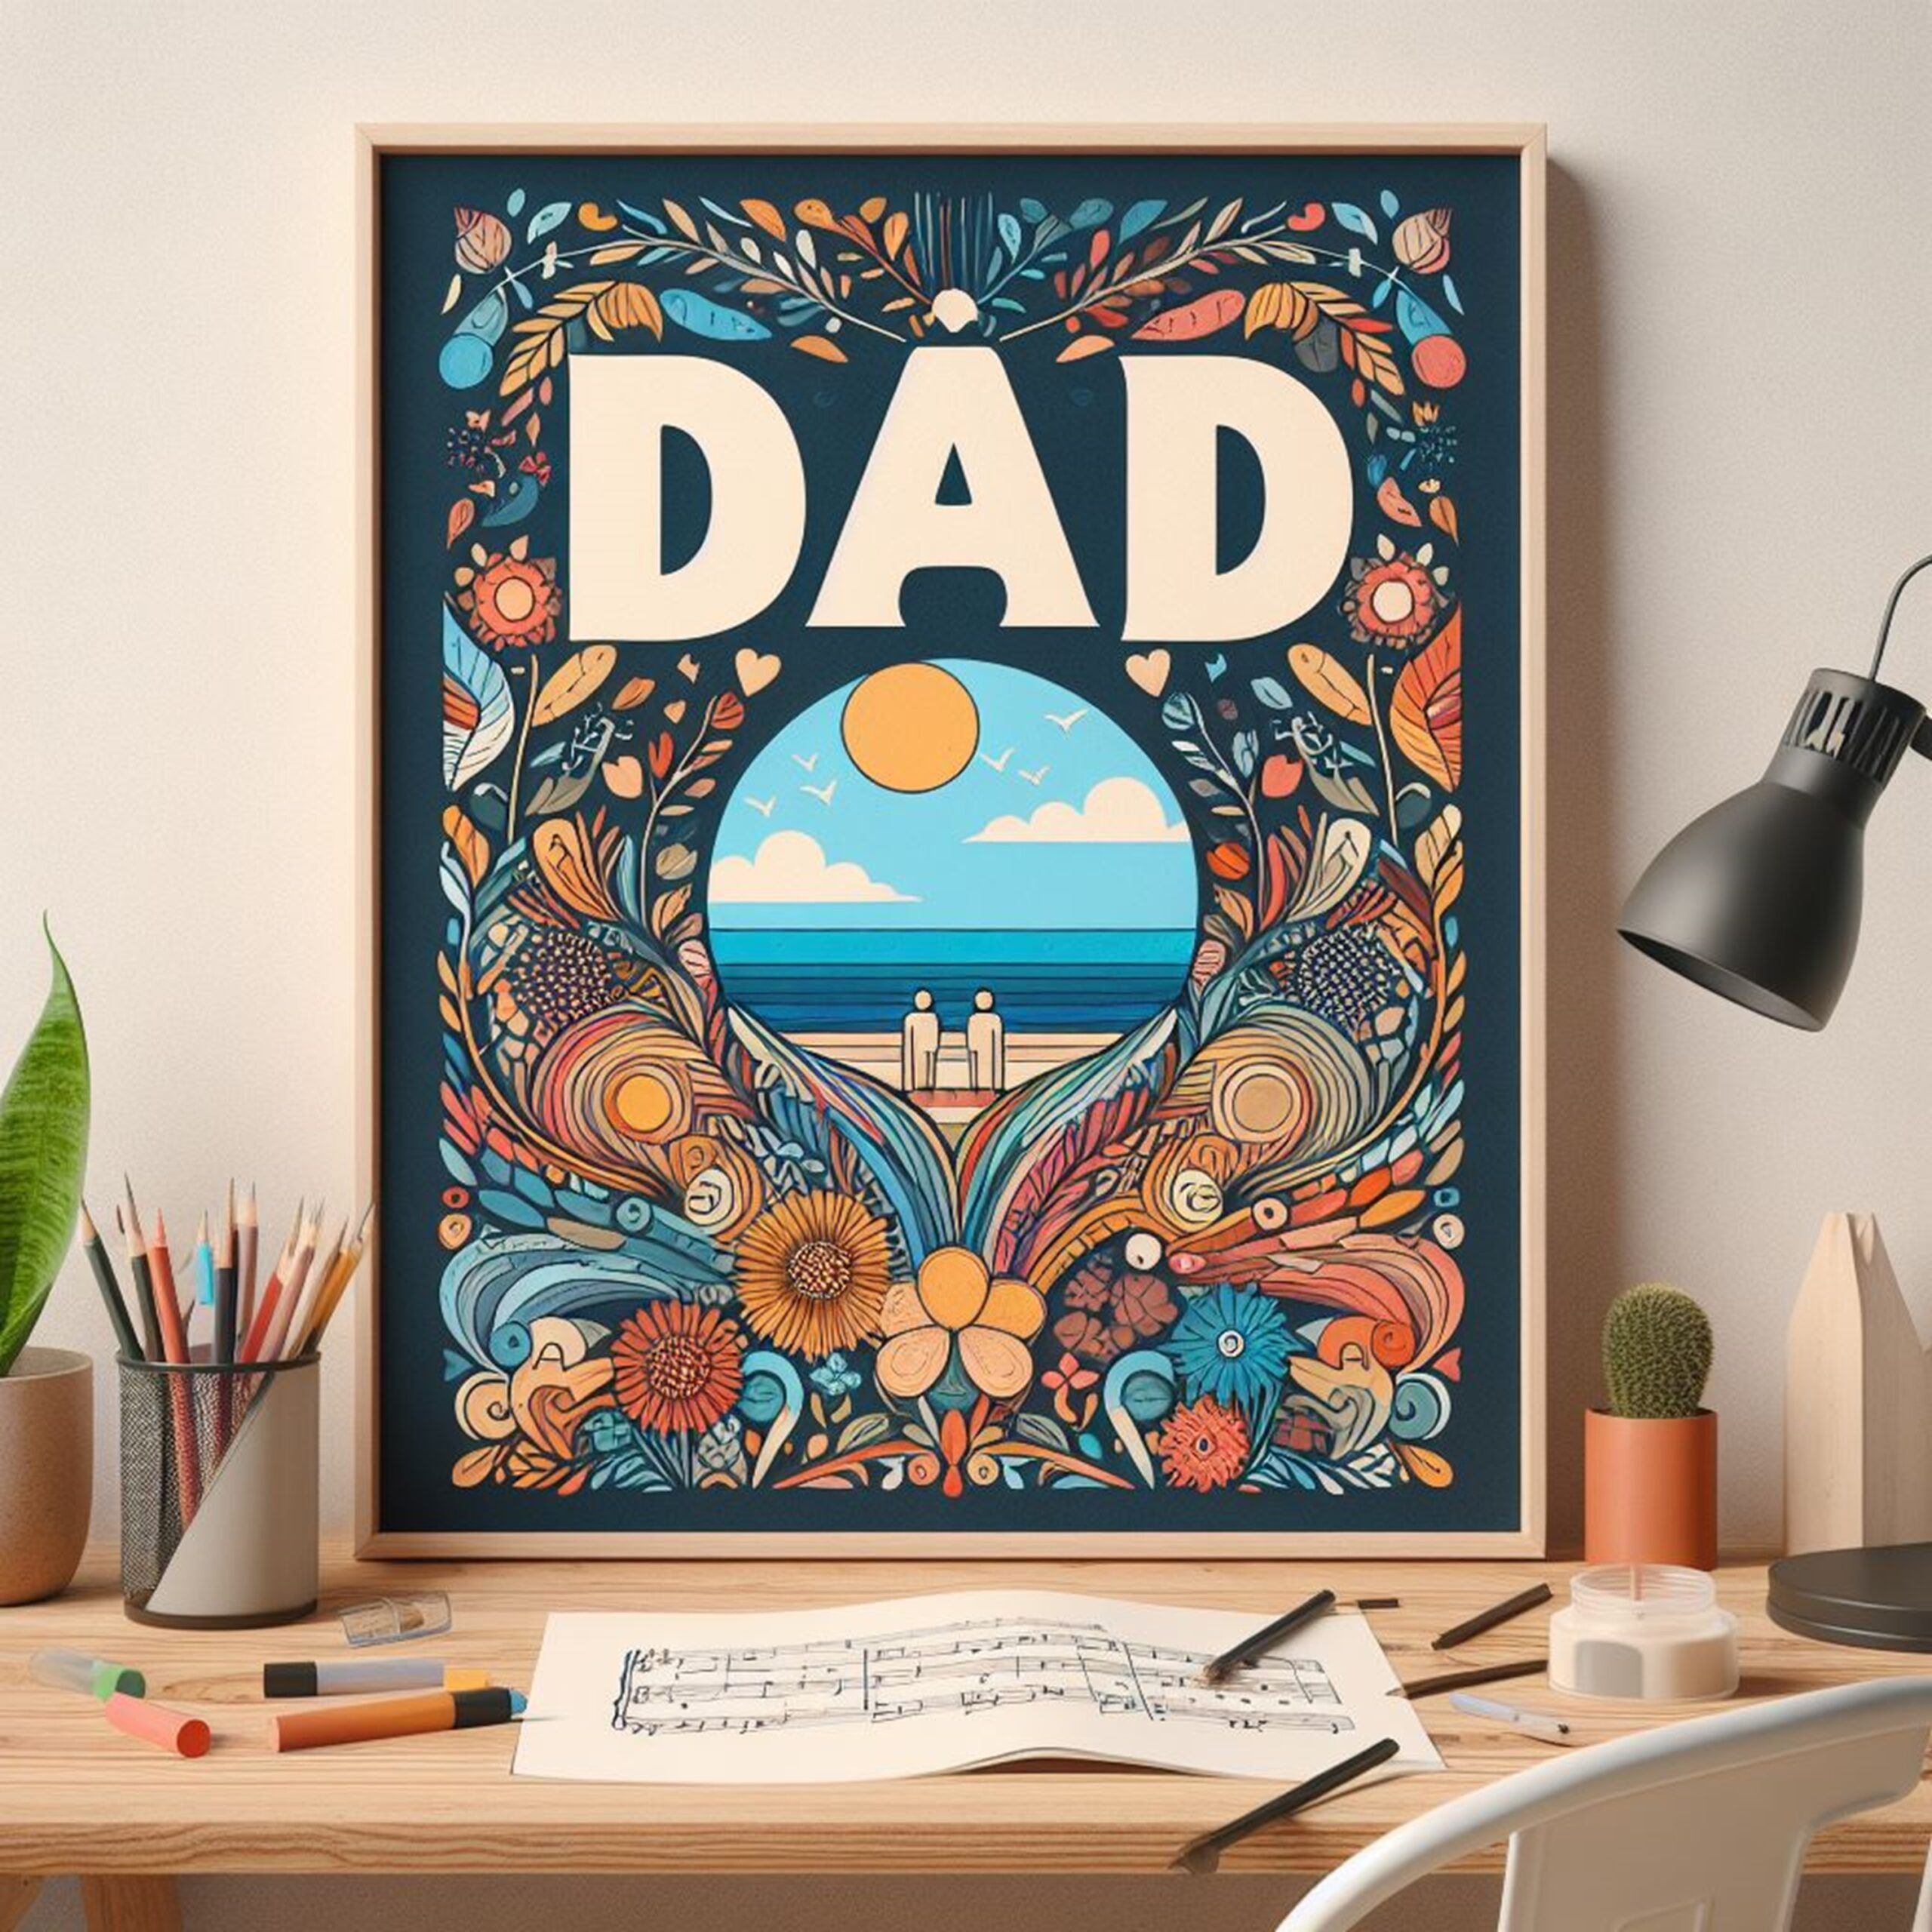 Dad by Gary Dranow art work